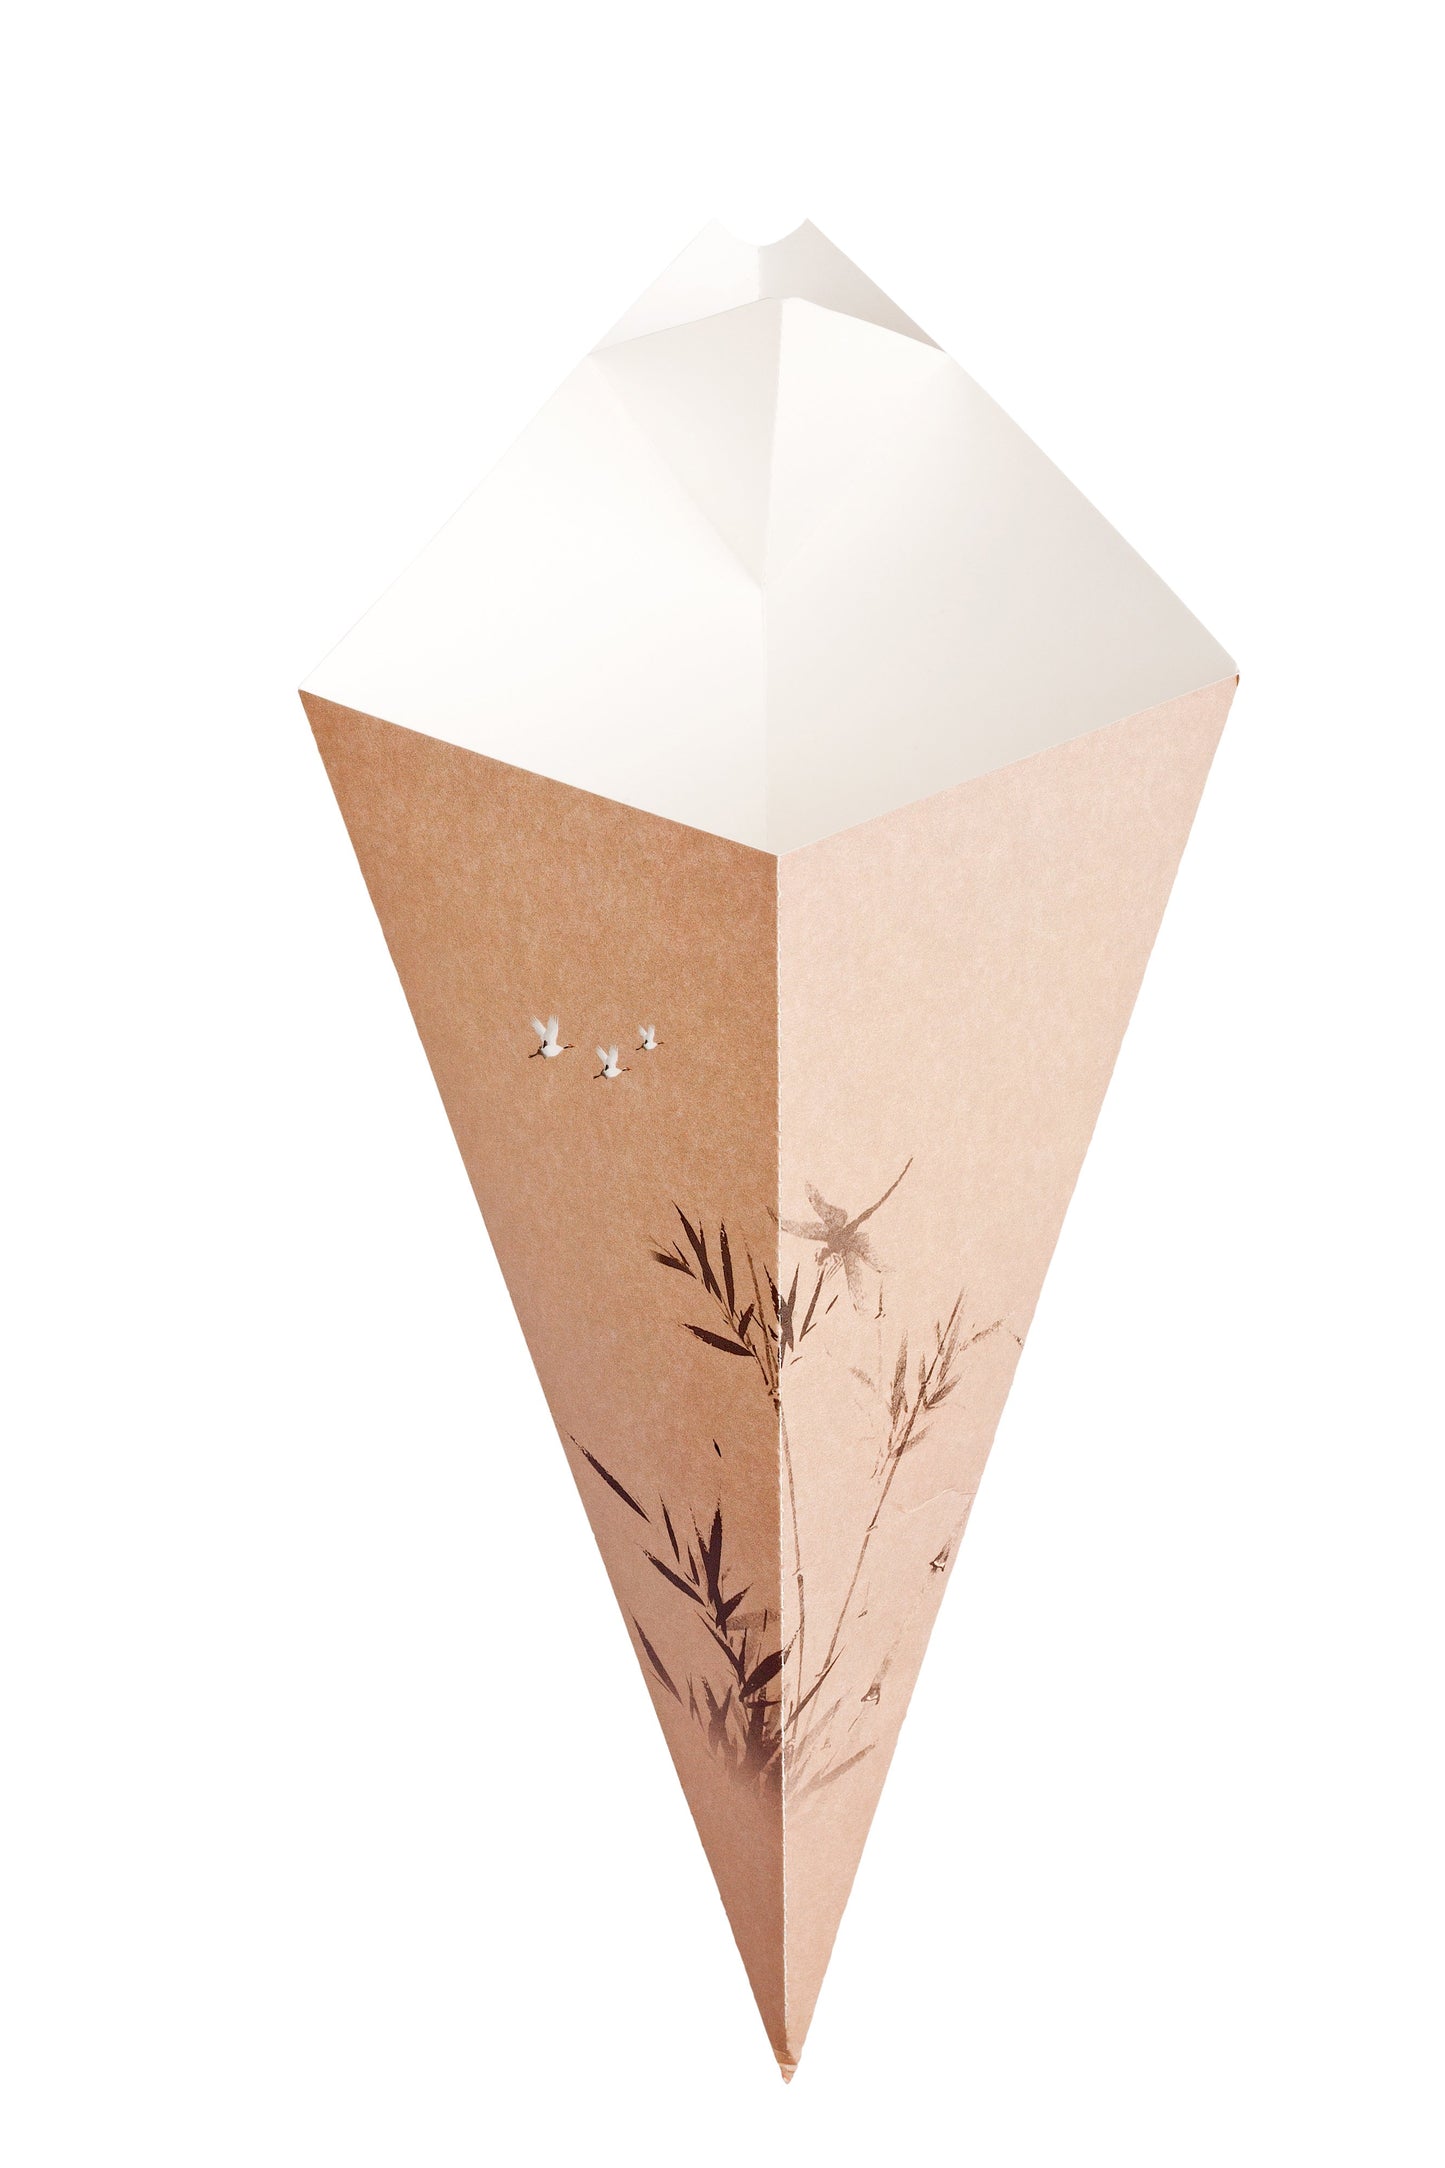 Conetek Bamboo Print Craft Food Cone with Dipping Pocket 39.37 cm 100 count box